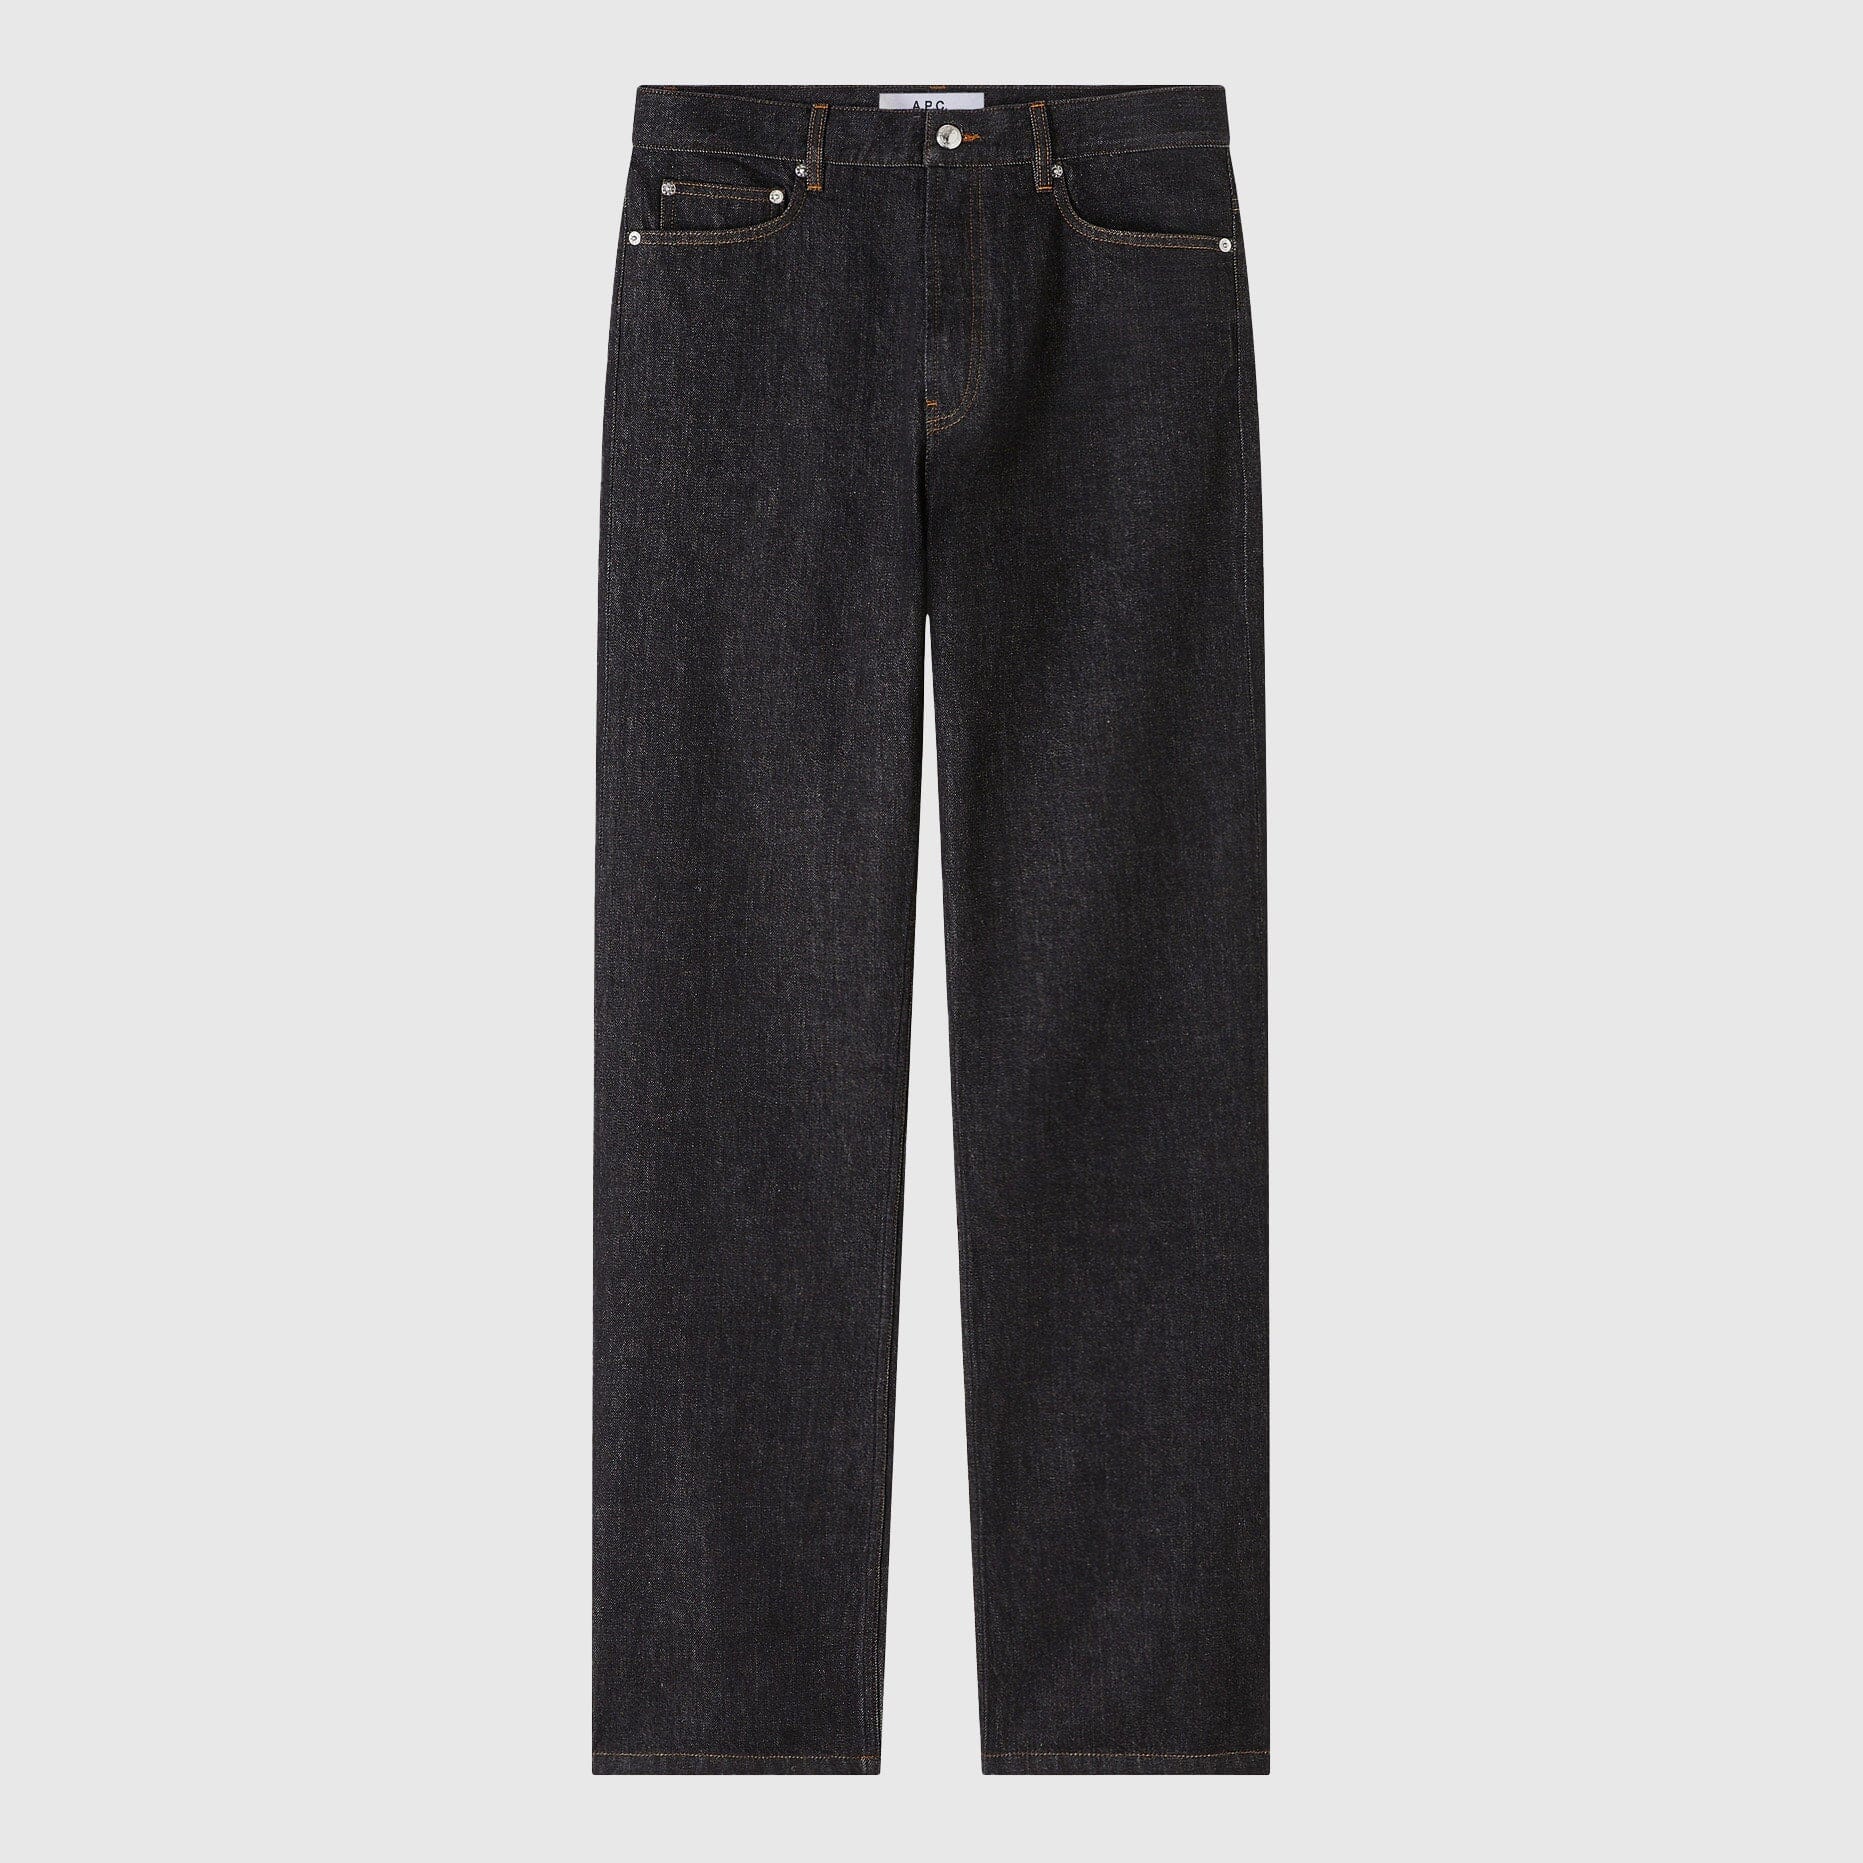 A.P.C. x JW Anderson Willie Jeans - Washed Black Pants A.P.C. x JW Anderson 